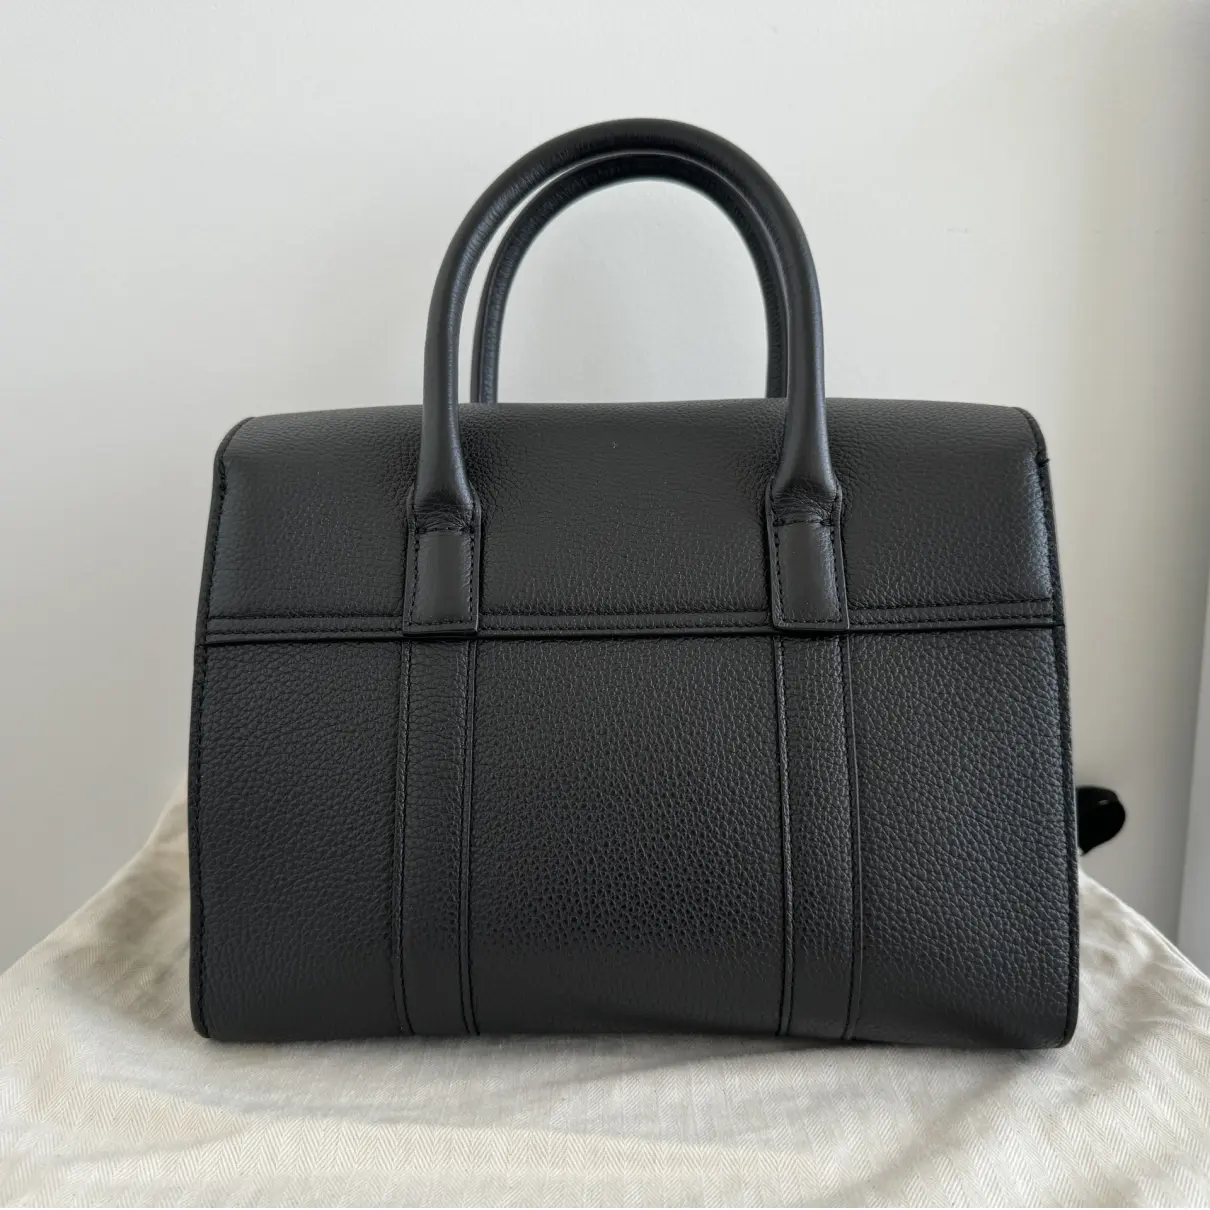 Buy Mulberry Bayswater Small leather handbag online